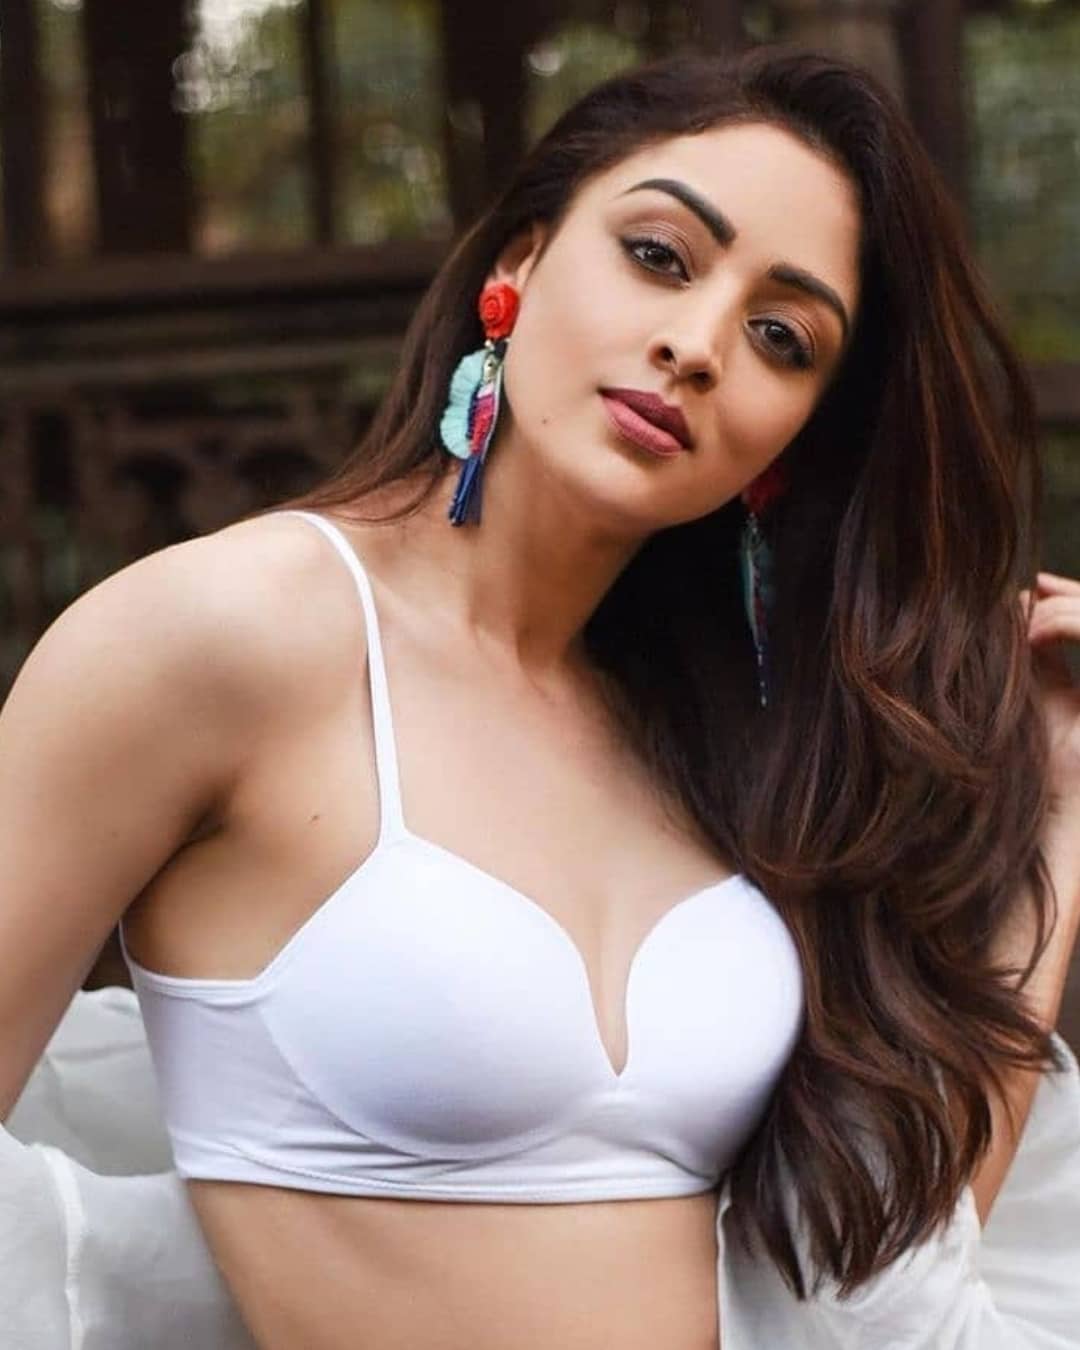 Sandeepa Dhar Hot and Sexy Pictures - Insta Stars